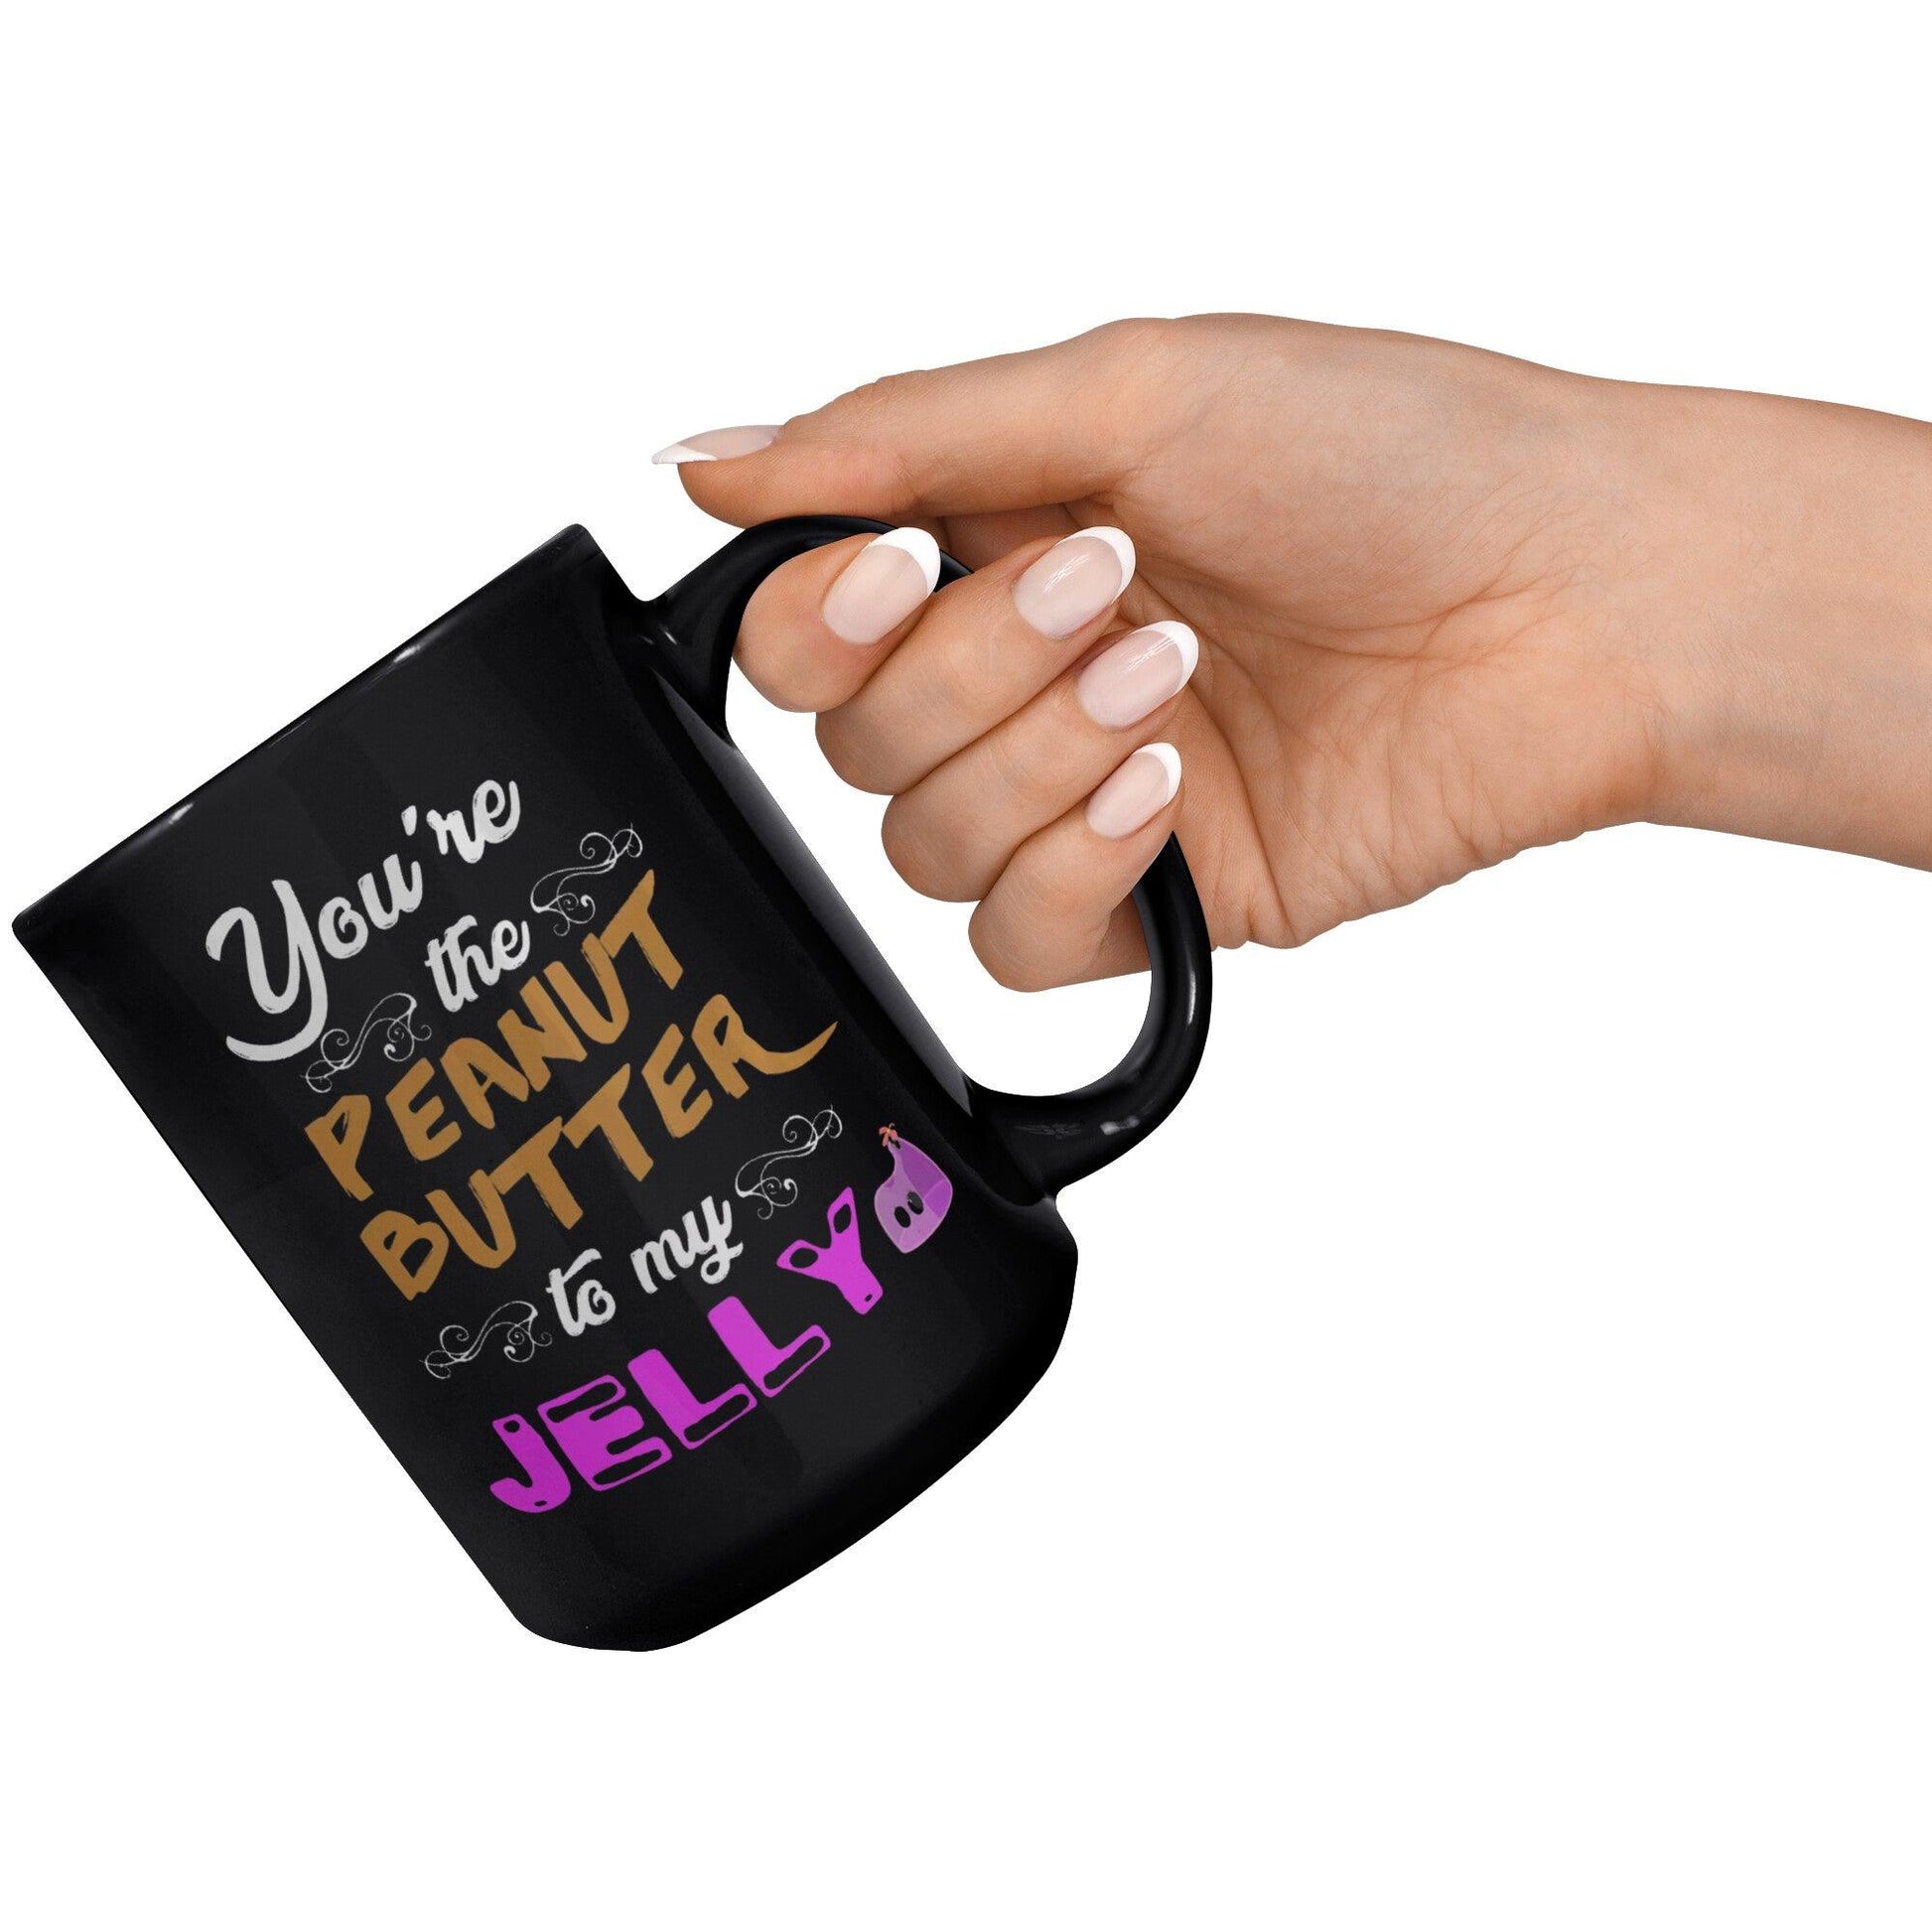 You're The Peanut Butter To My Jelly Black Mug - TheGivenGet